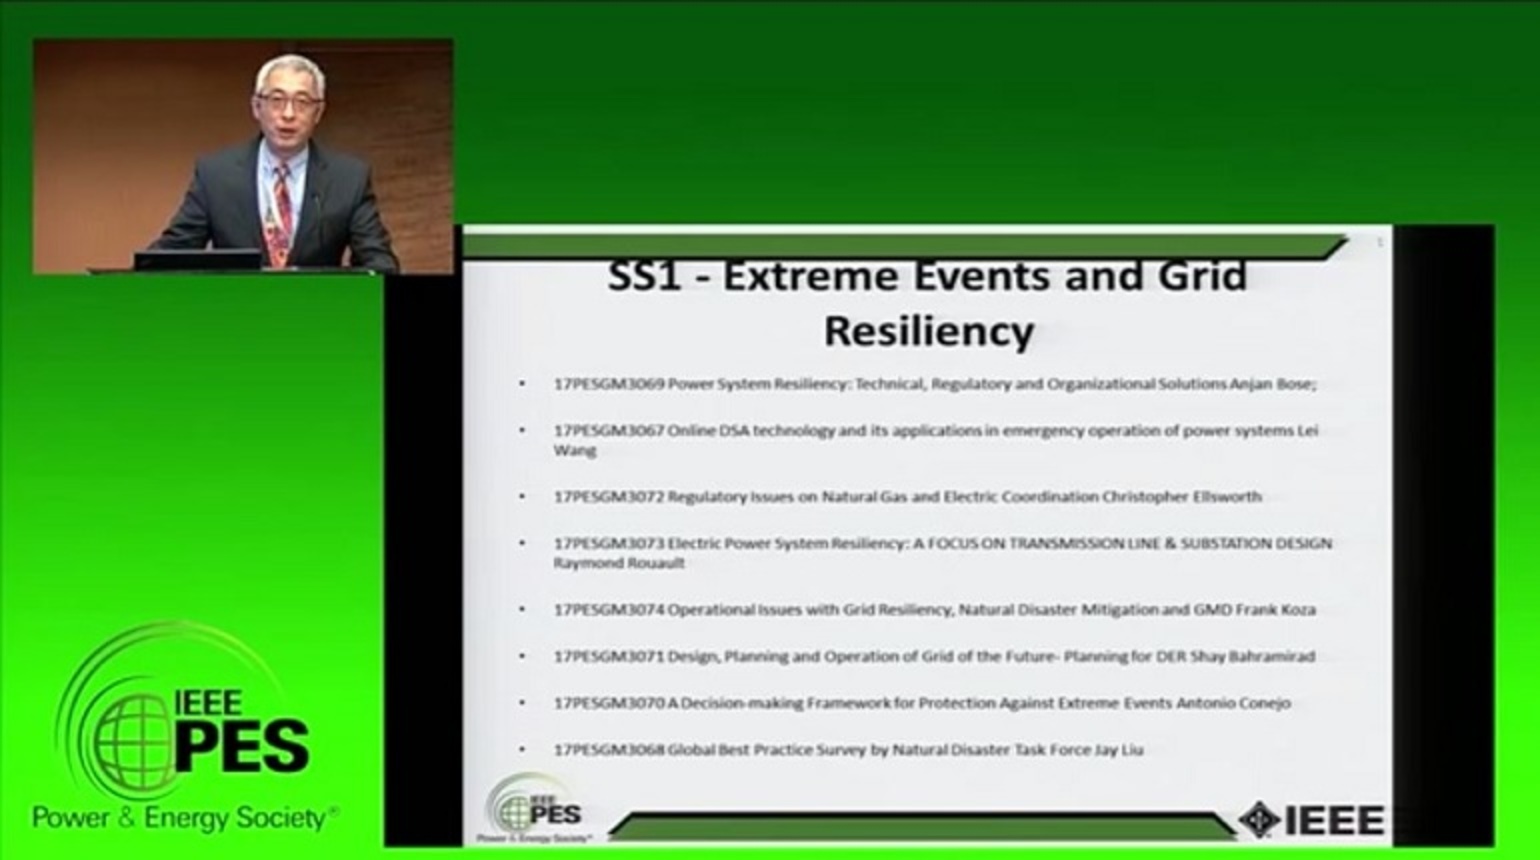 PES GM 2017 - Extreme Events and Grid Resiliency Super Session